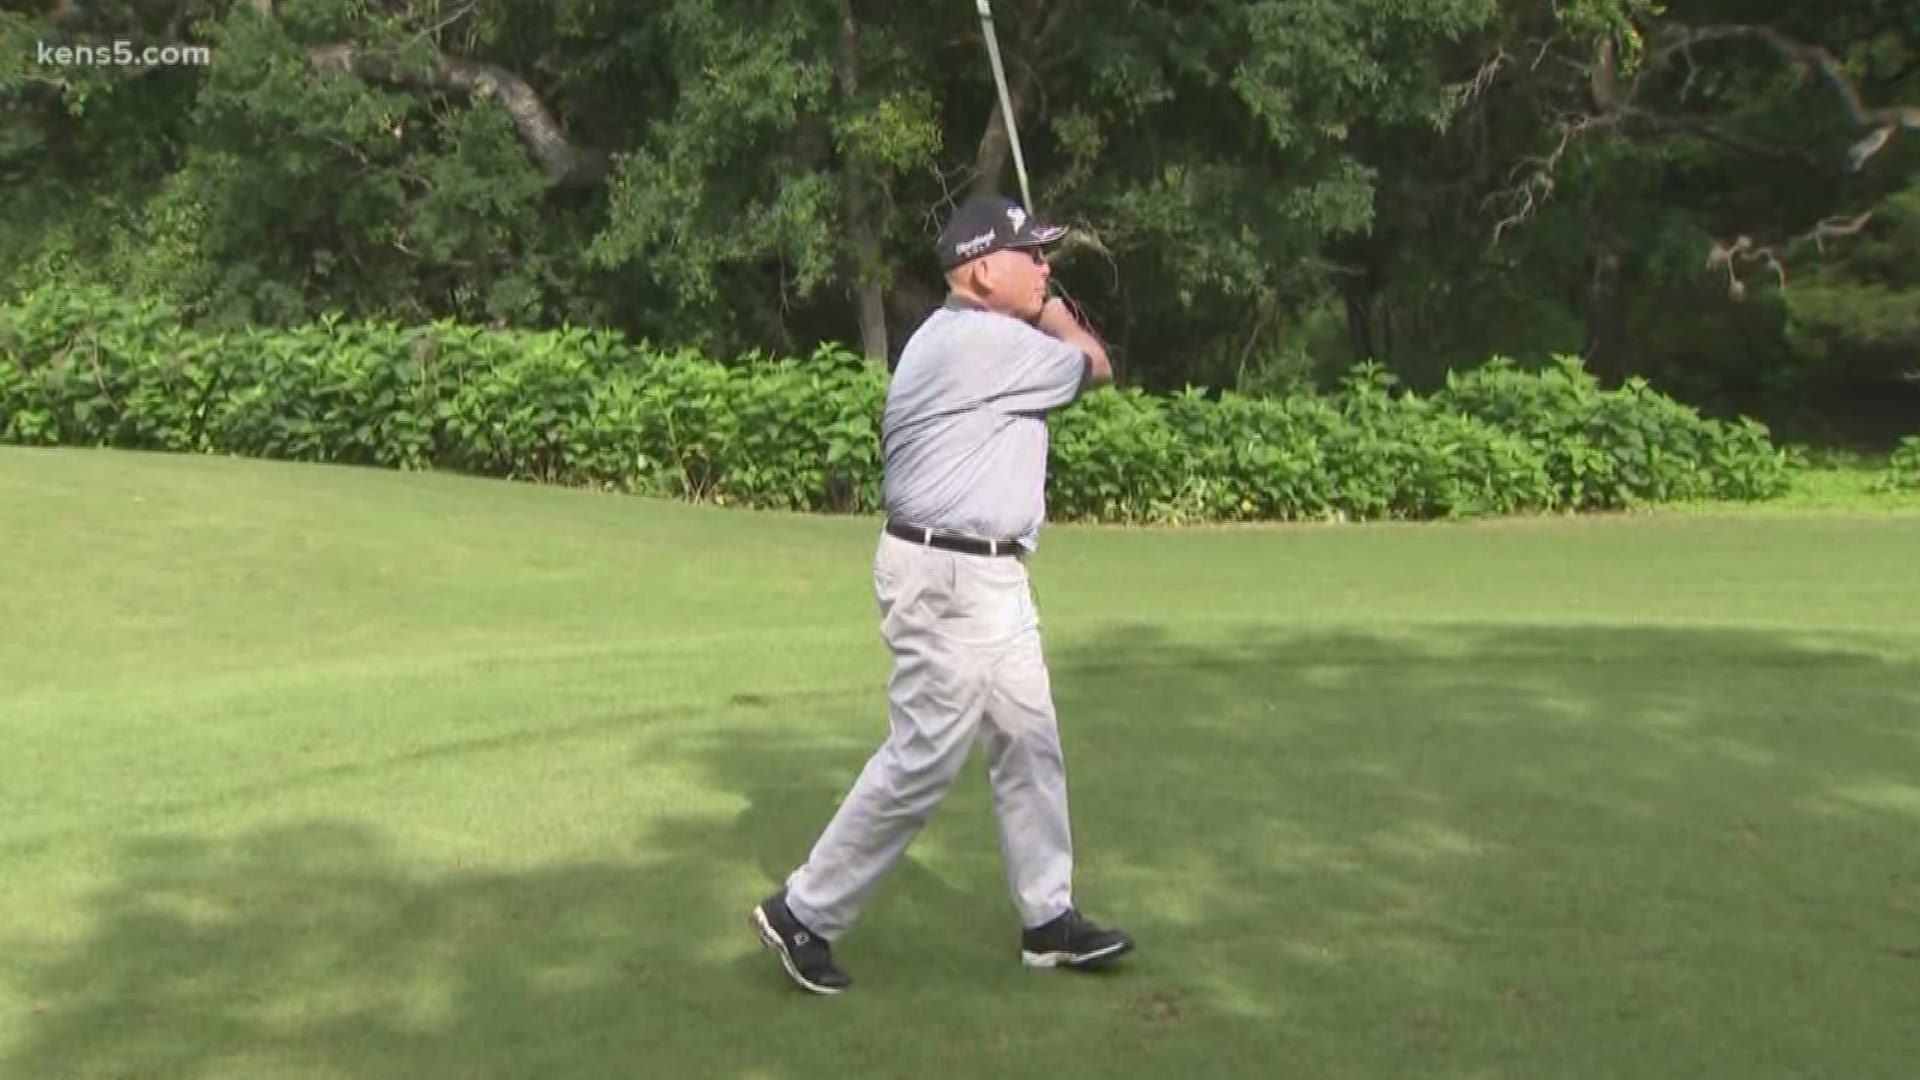 It is said "age is just a number," and for a 94-year-old World War II veteran, that's exactly right. The retired staff sergeant still brings his "A-game" to the golf course.